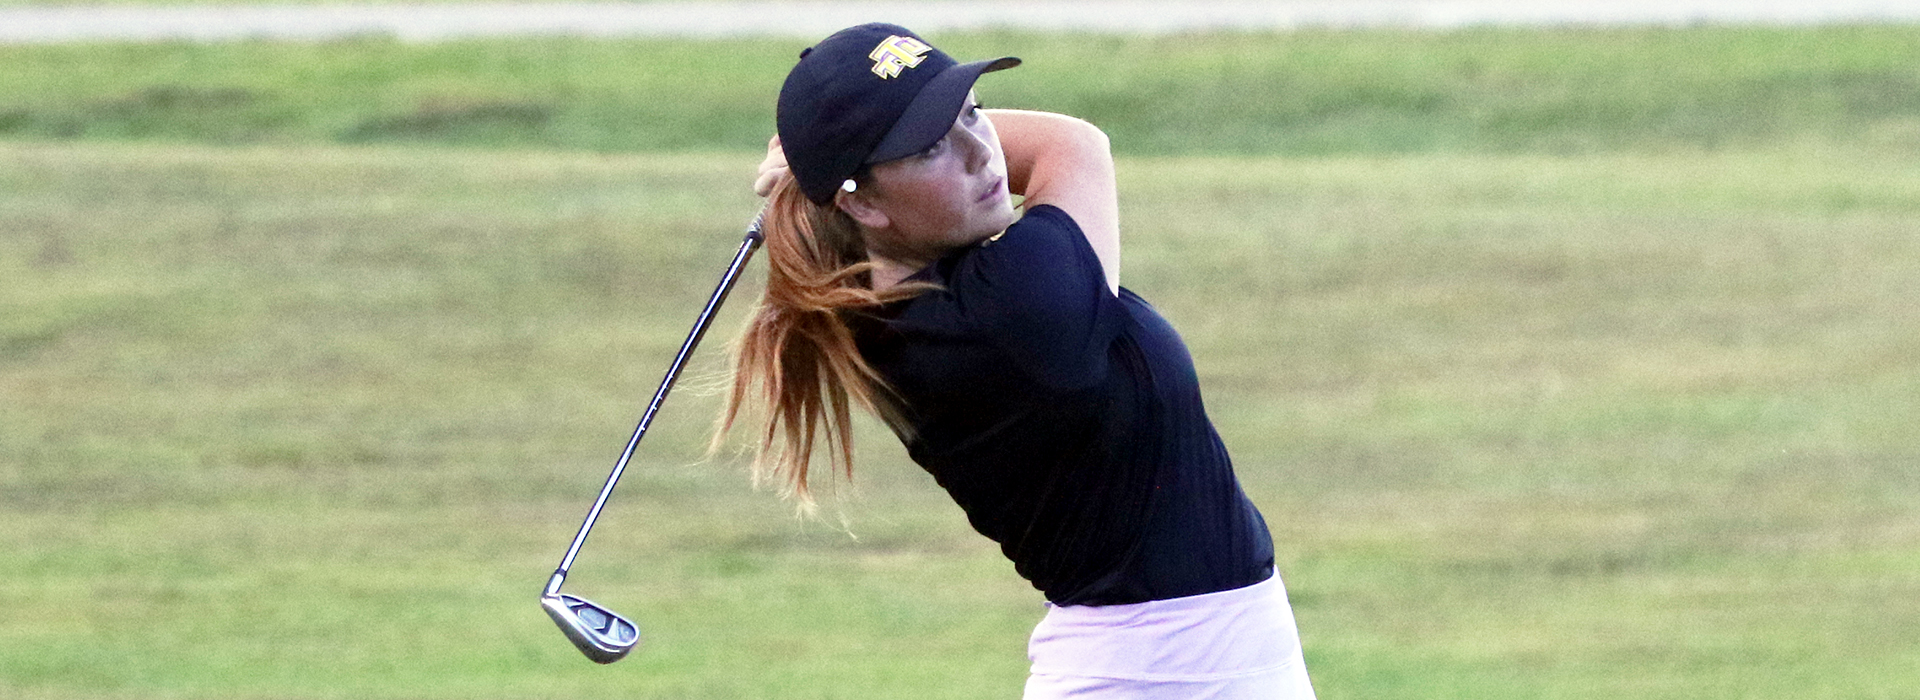 Tech closes fall with top-five performance at Terrier Intercollegiate, Sciolis places third